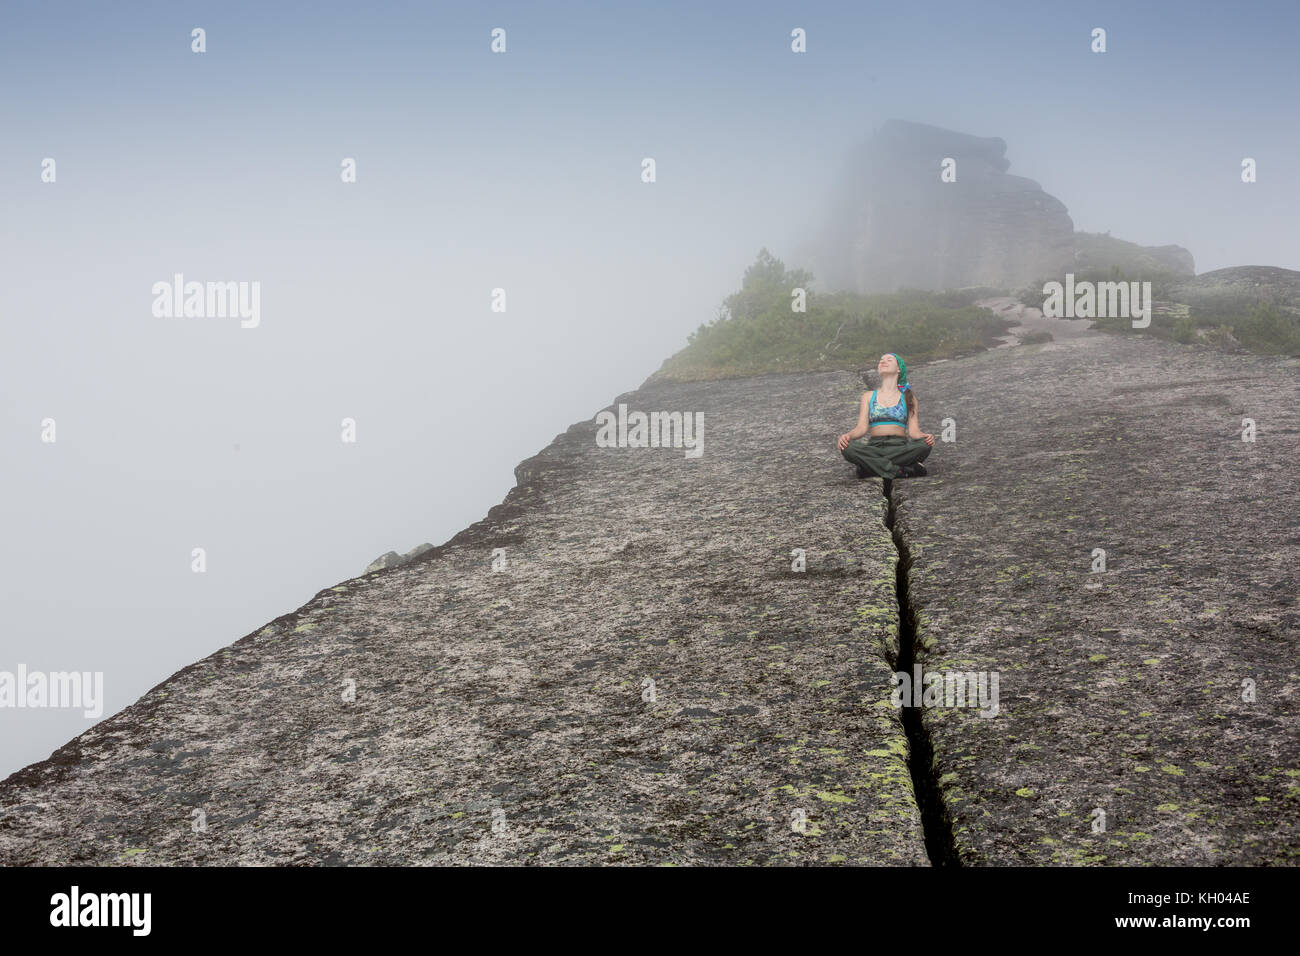 Woman standing on solid rock to avoid earthquake Stock Photo